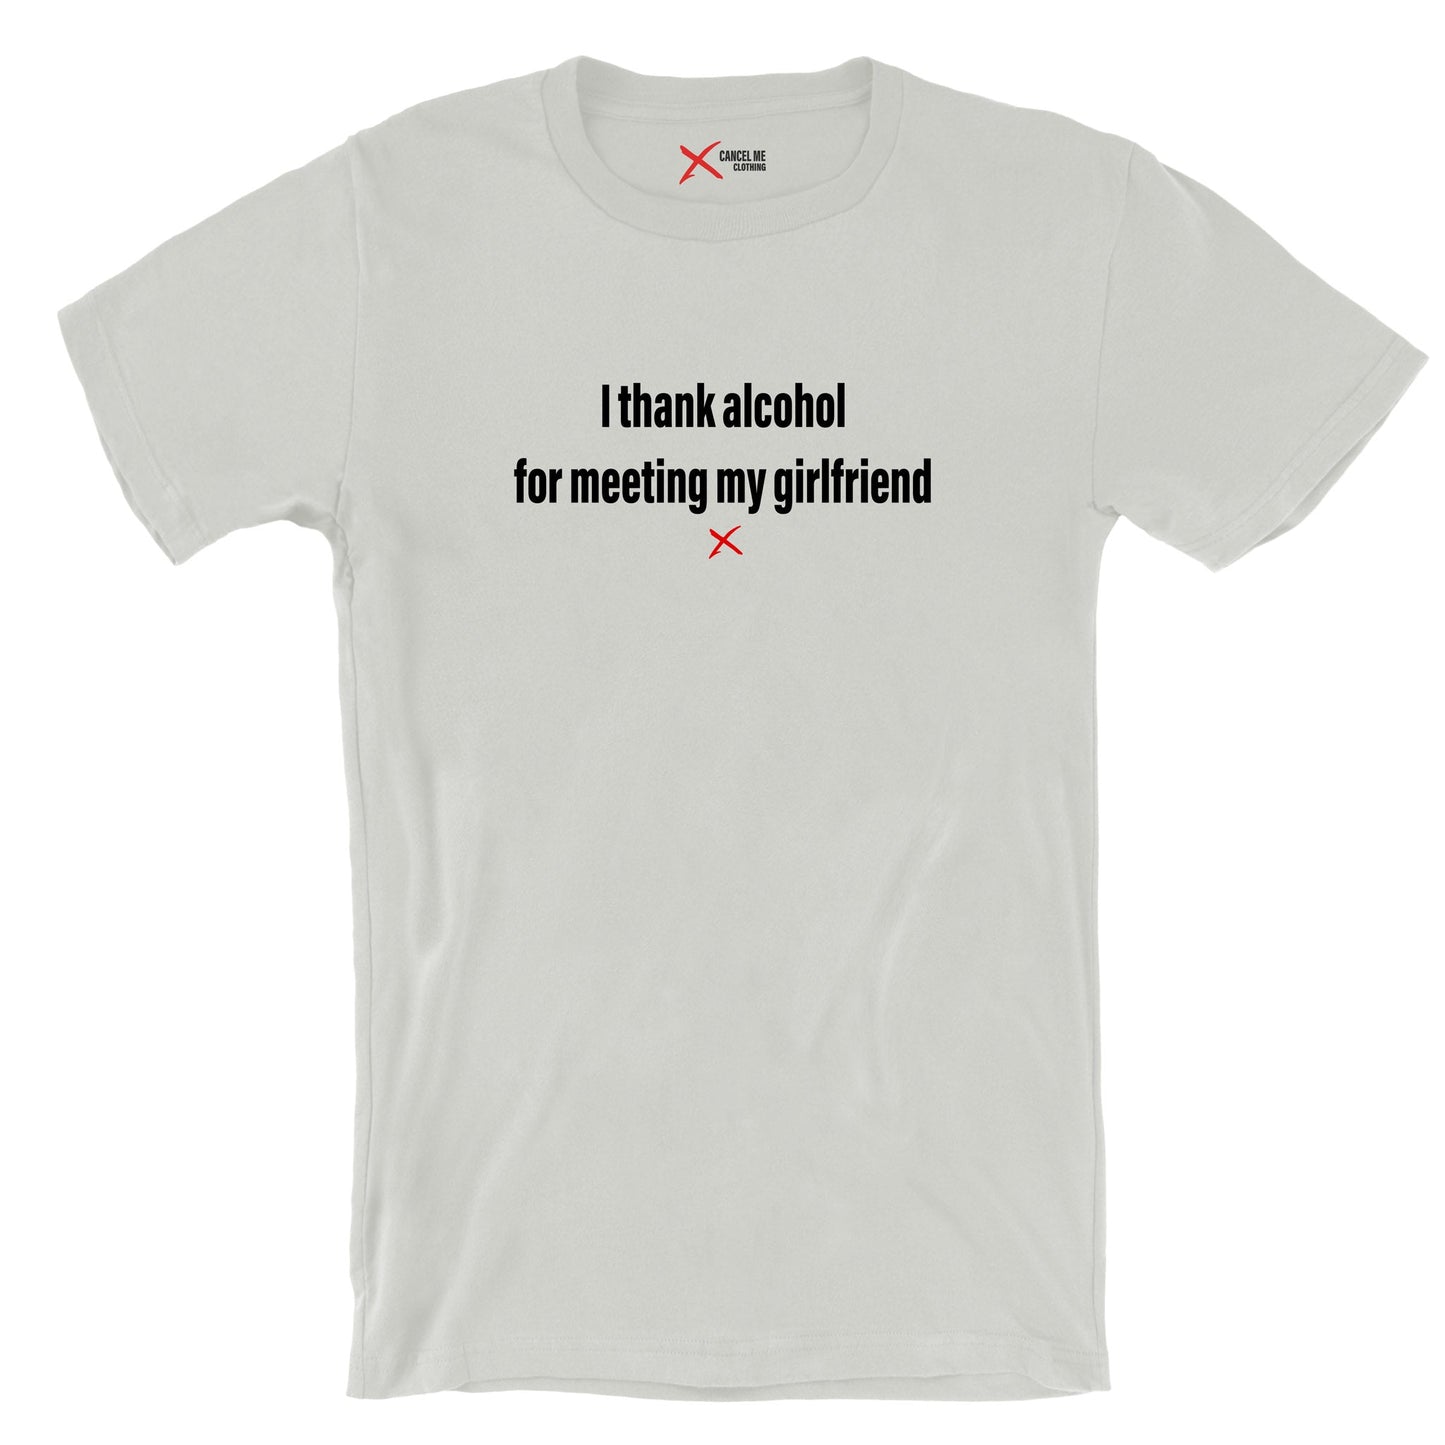 I thank alcohol for meeting my girlfriend - Shirt